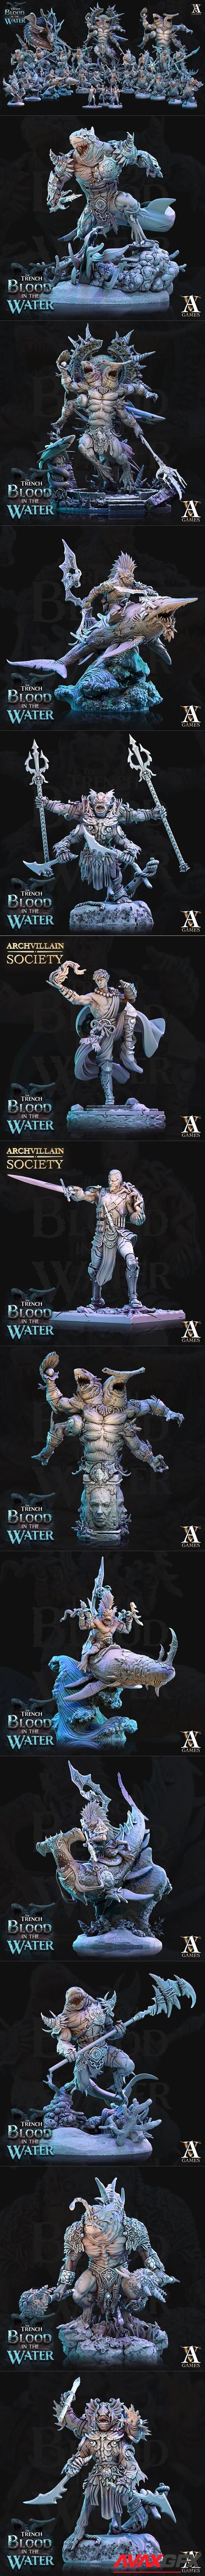 Archvillain Games - The Trench - Blood In the Water – 3D Printable STL